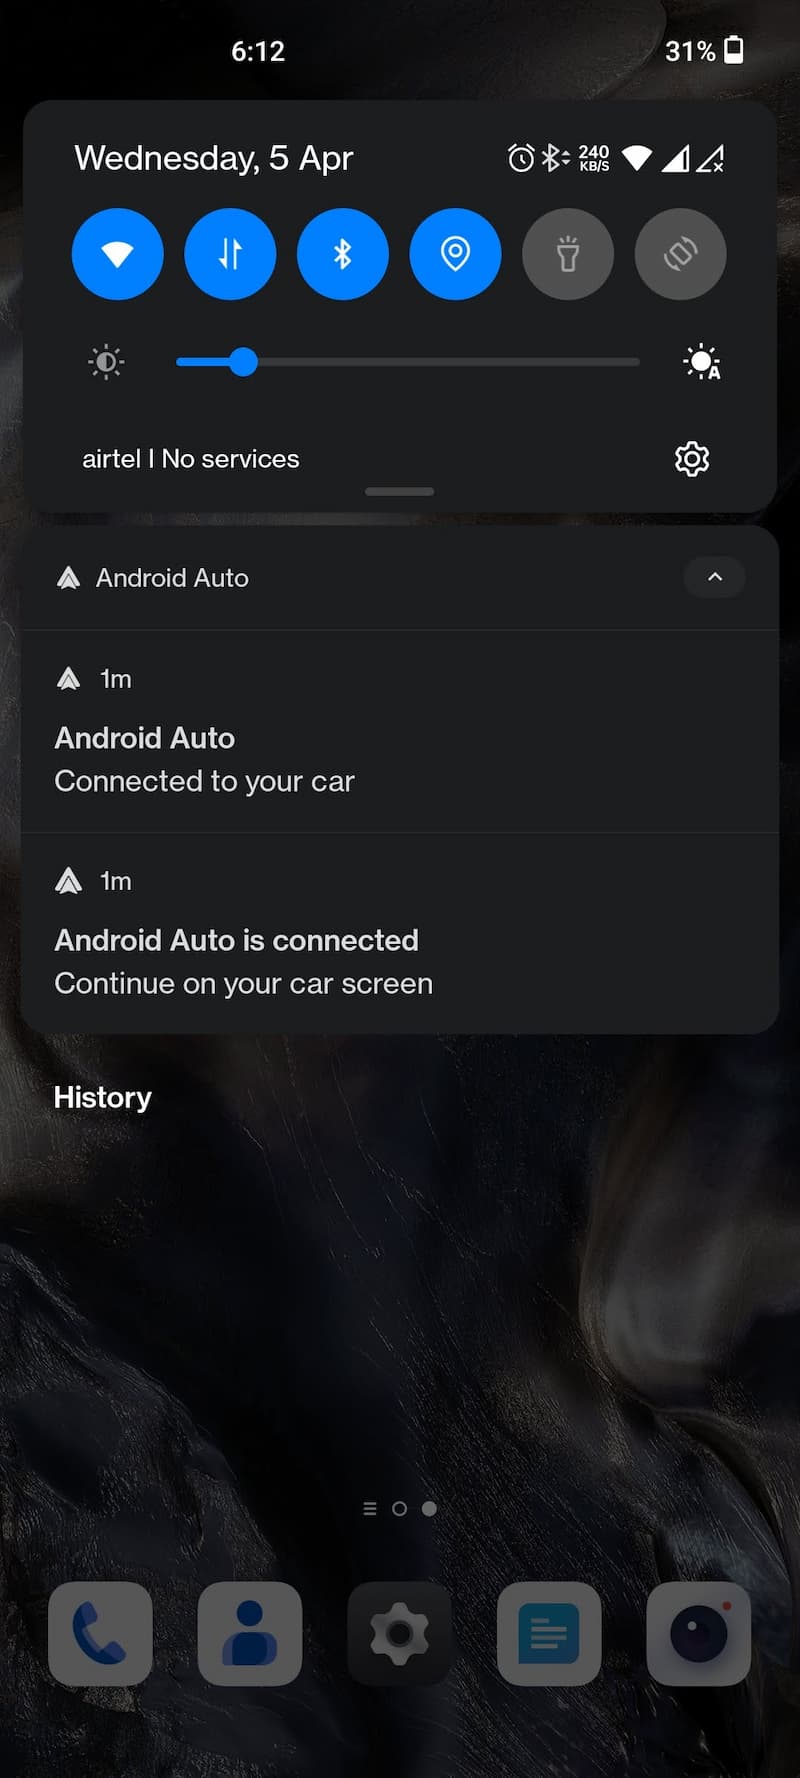 Android Auto Connected